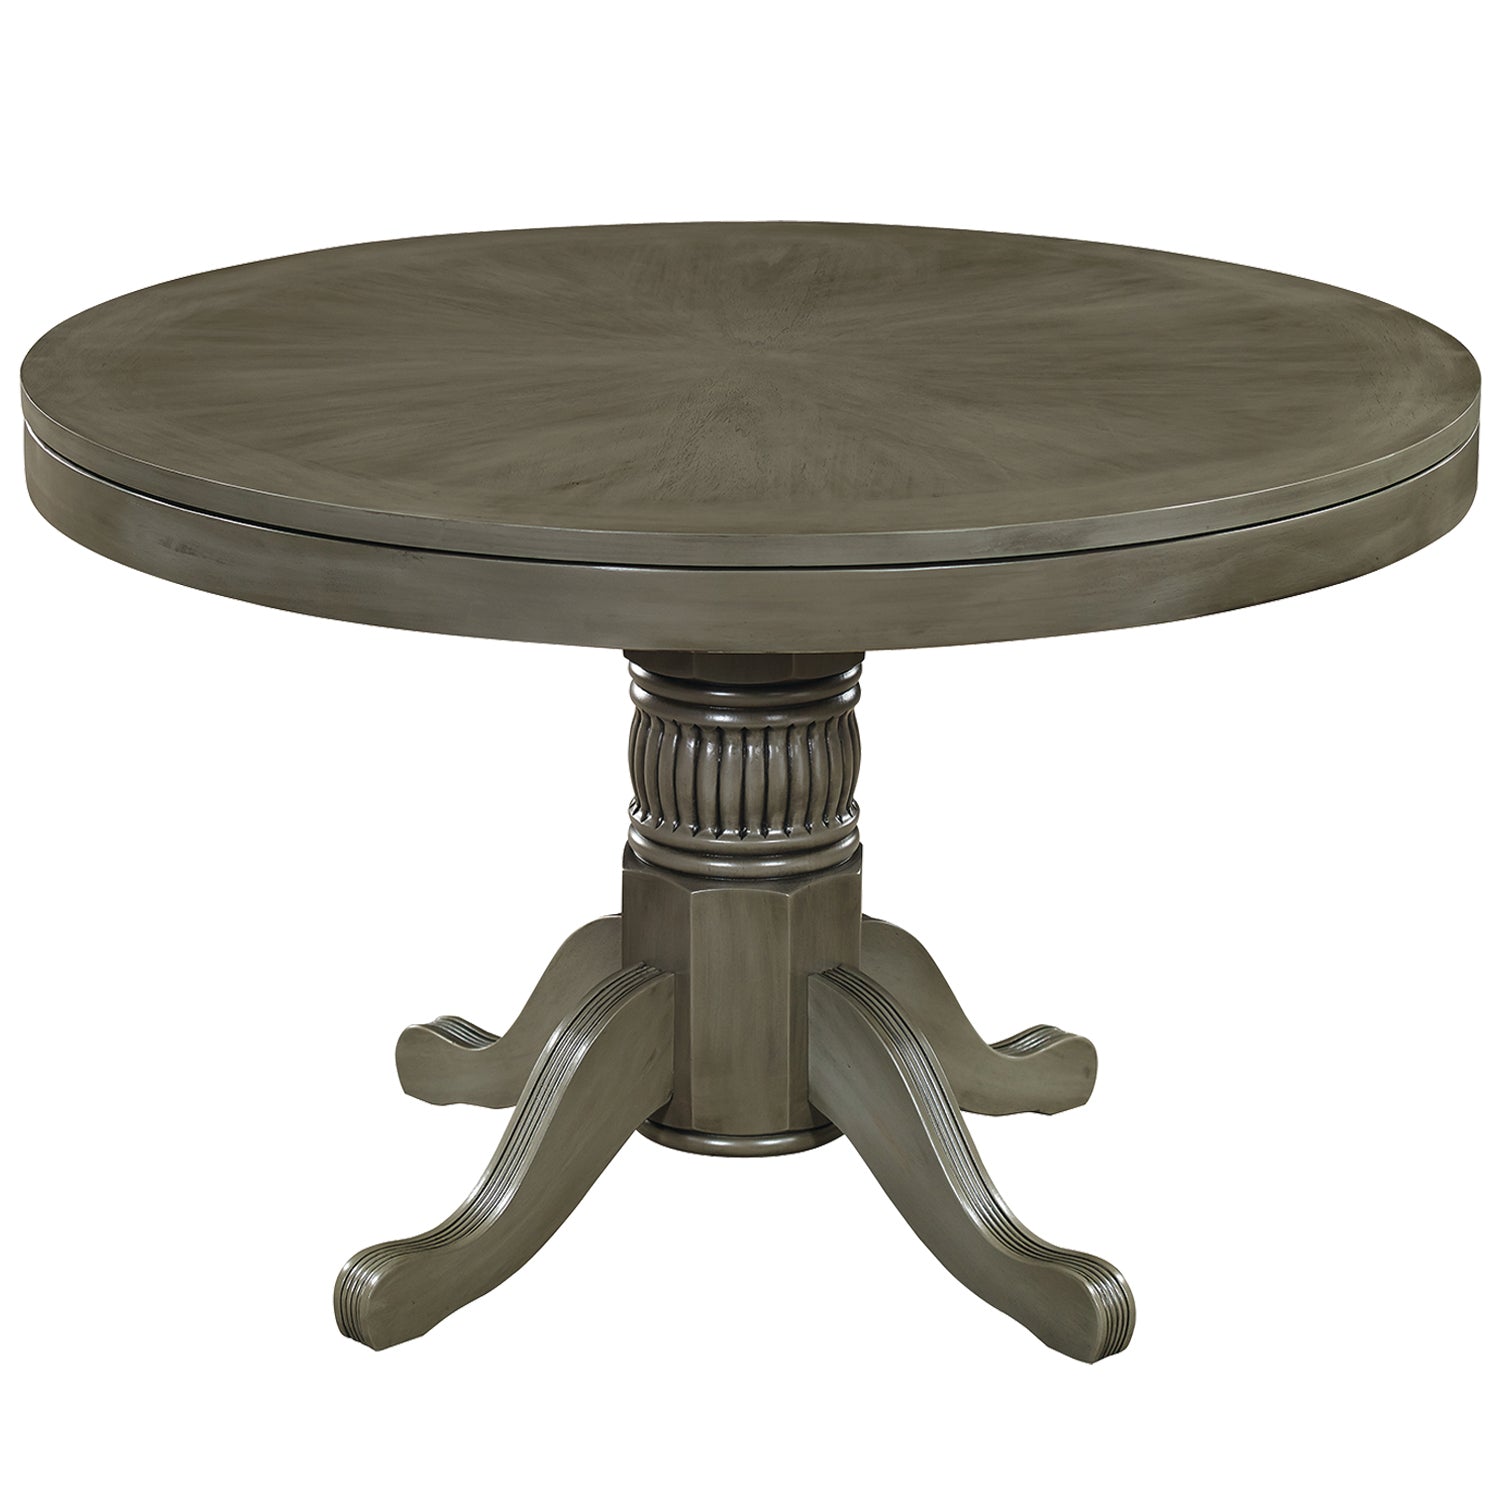 Round convertible game table with dining top in a slate finish.